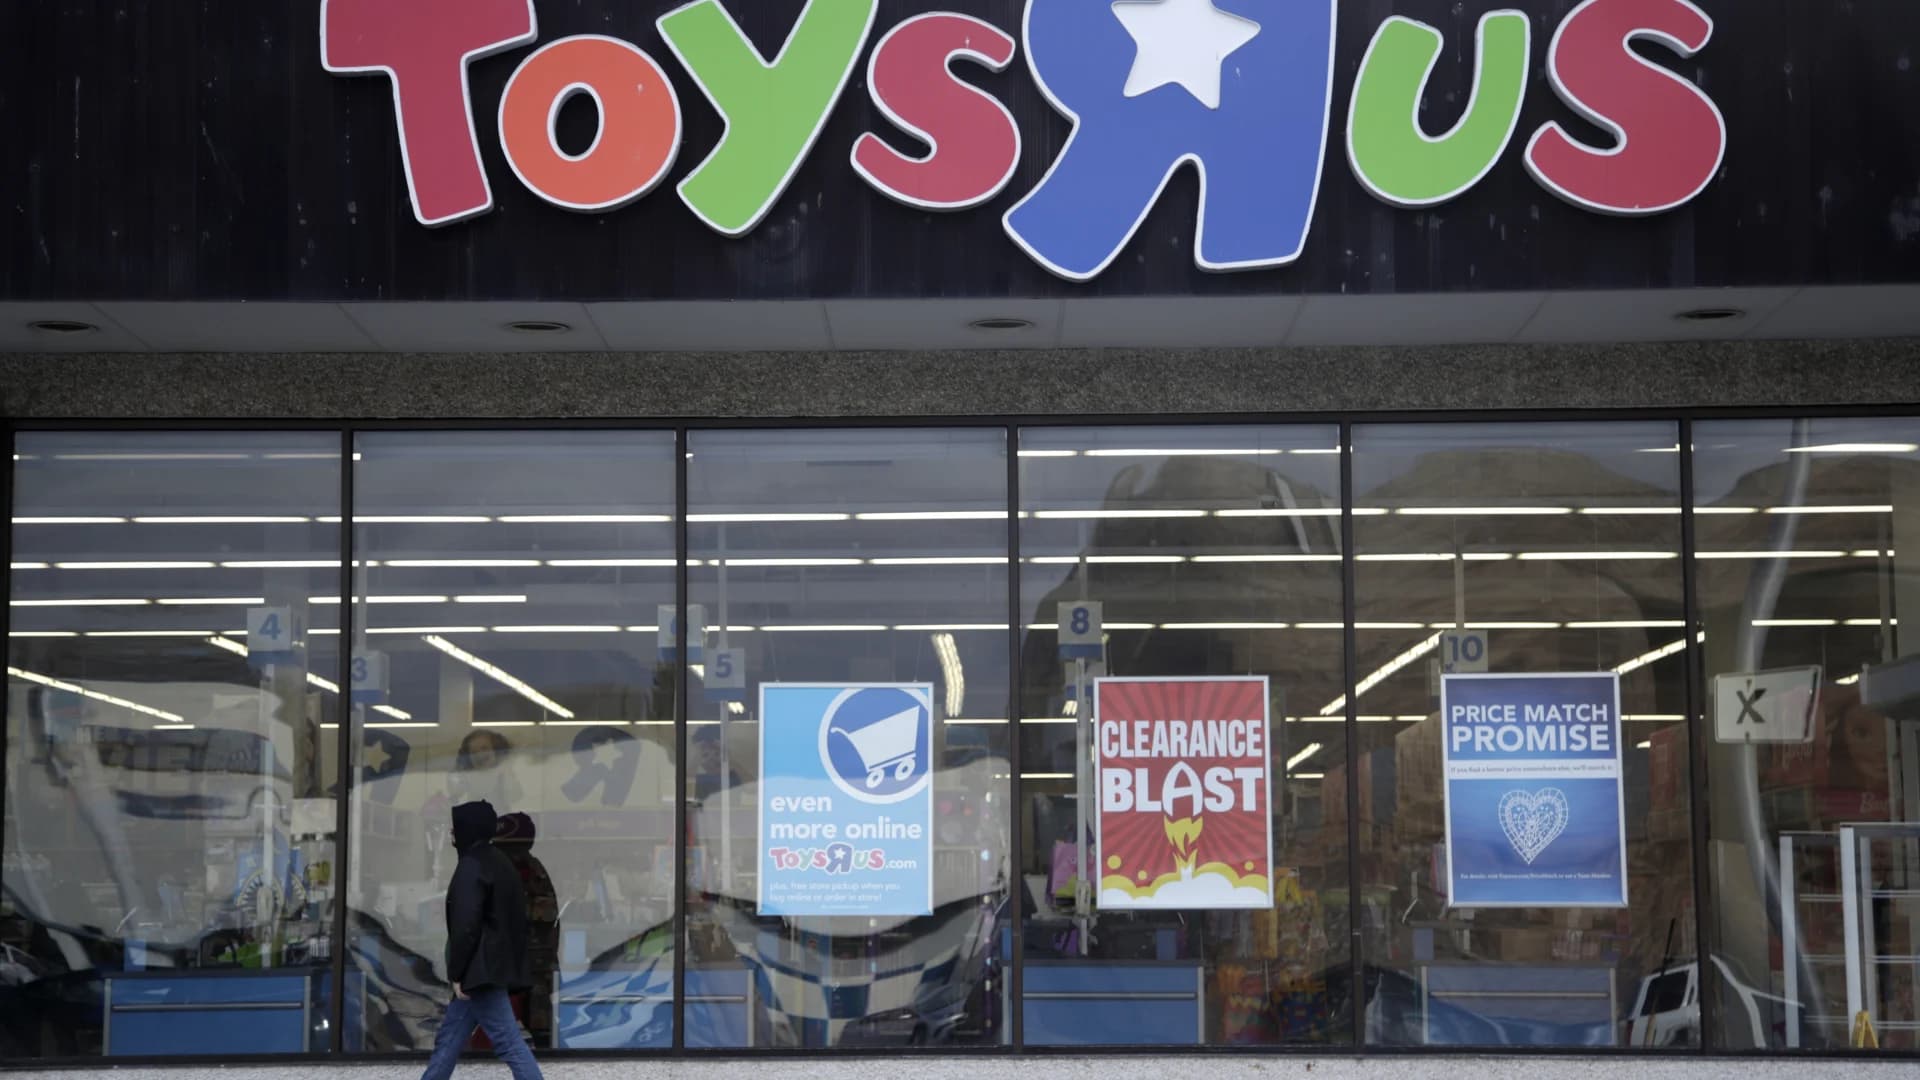 Toys R Us set to make a comeback inside Macy's department stores